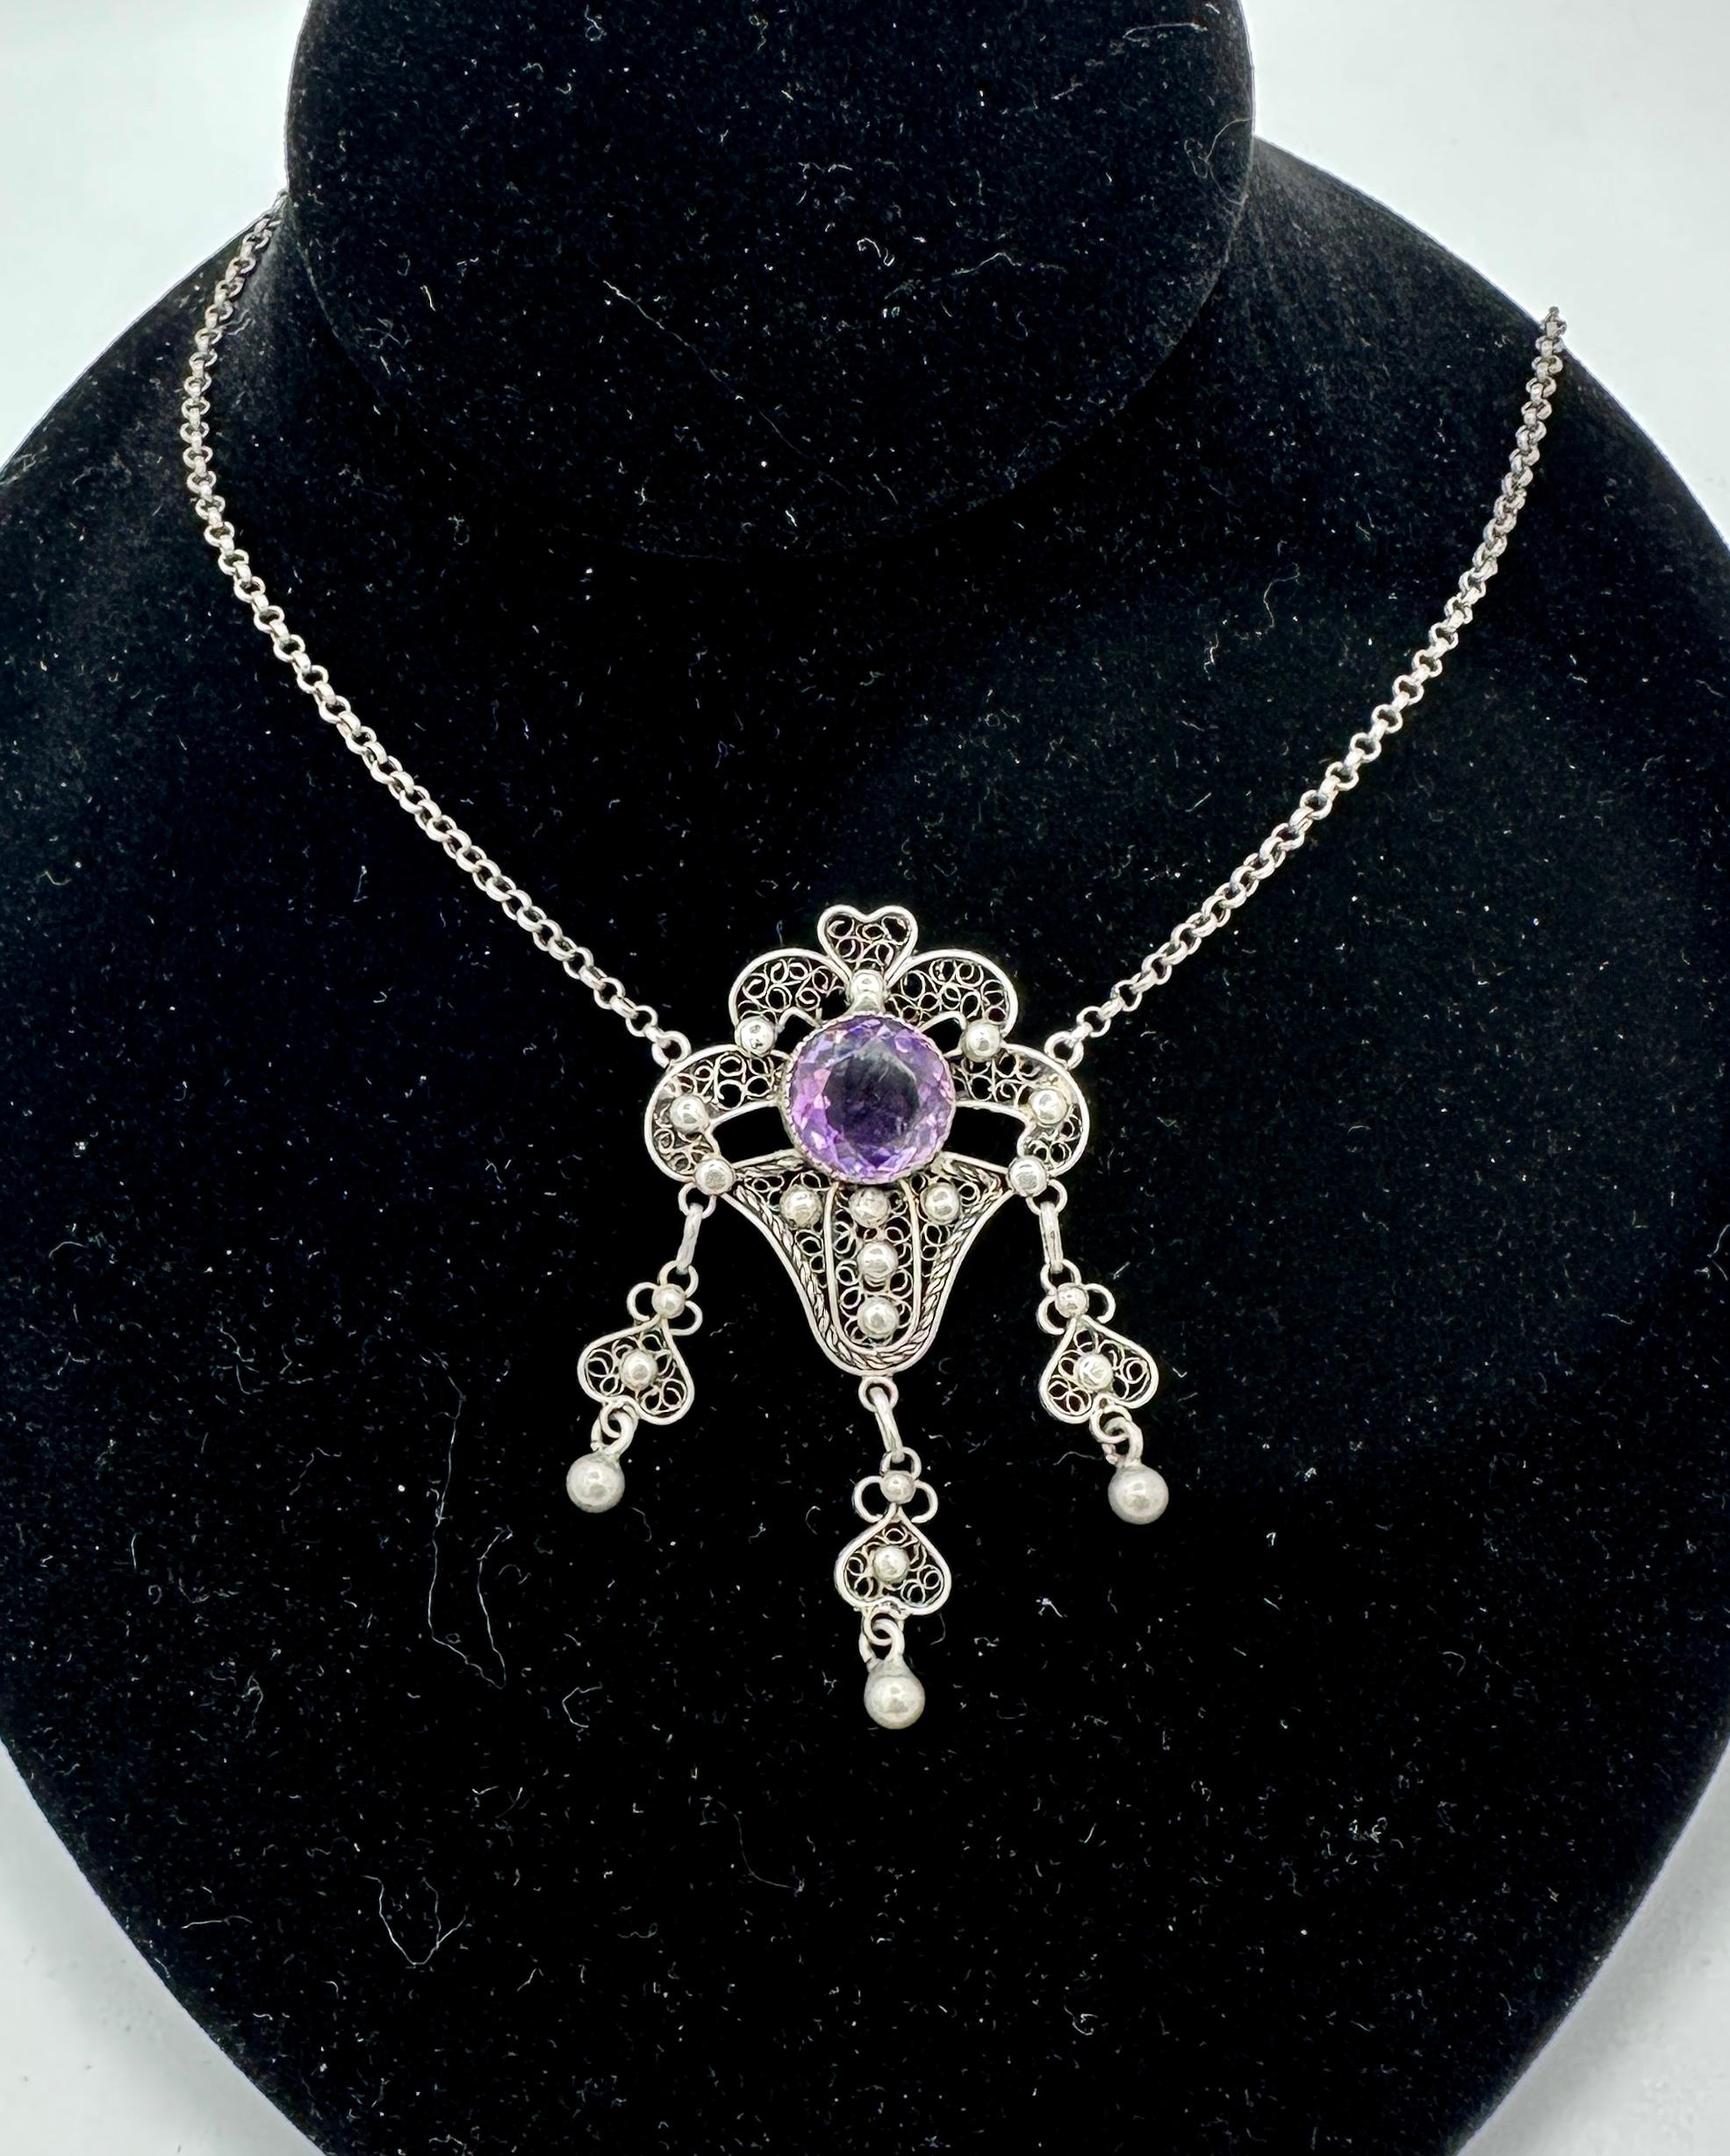 This is a magnificent Arts & Crafts Jugendstil Pendant Necklace in Silver with a gorgeous Rose De France Amethyst in the center and dating to circa 1900. 
The central Rose de France Amethyst is a stunning round faceted gem of 12mm in diameter and